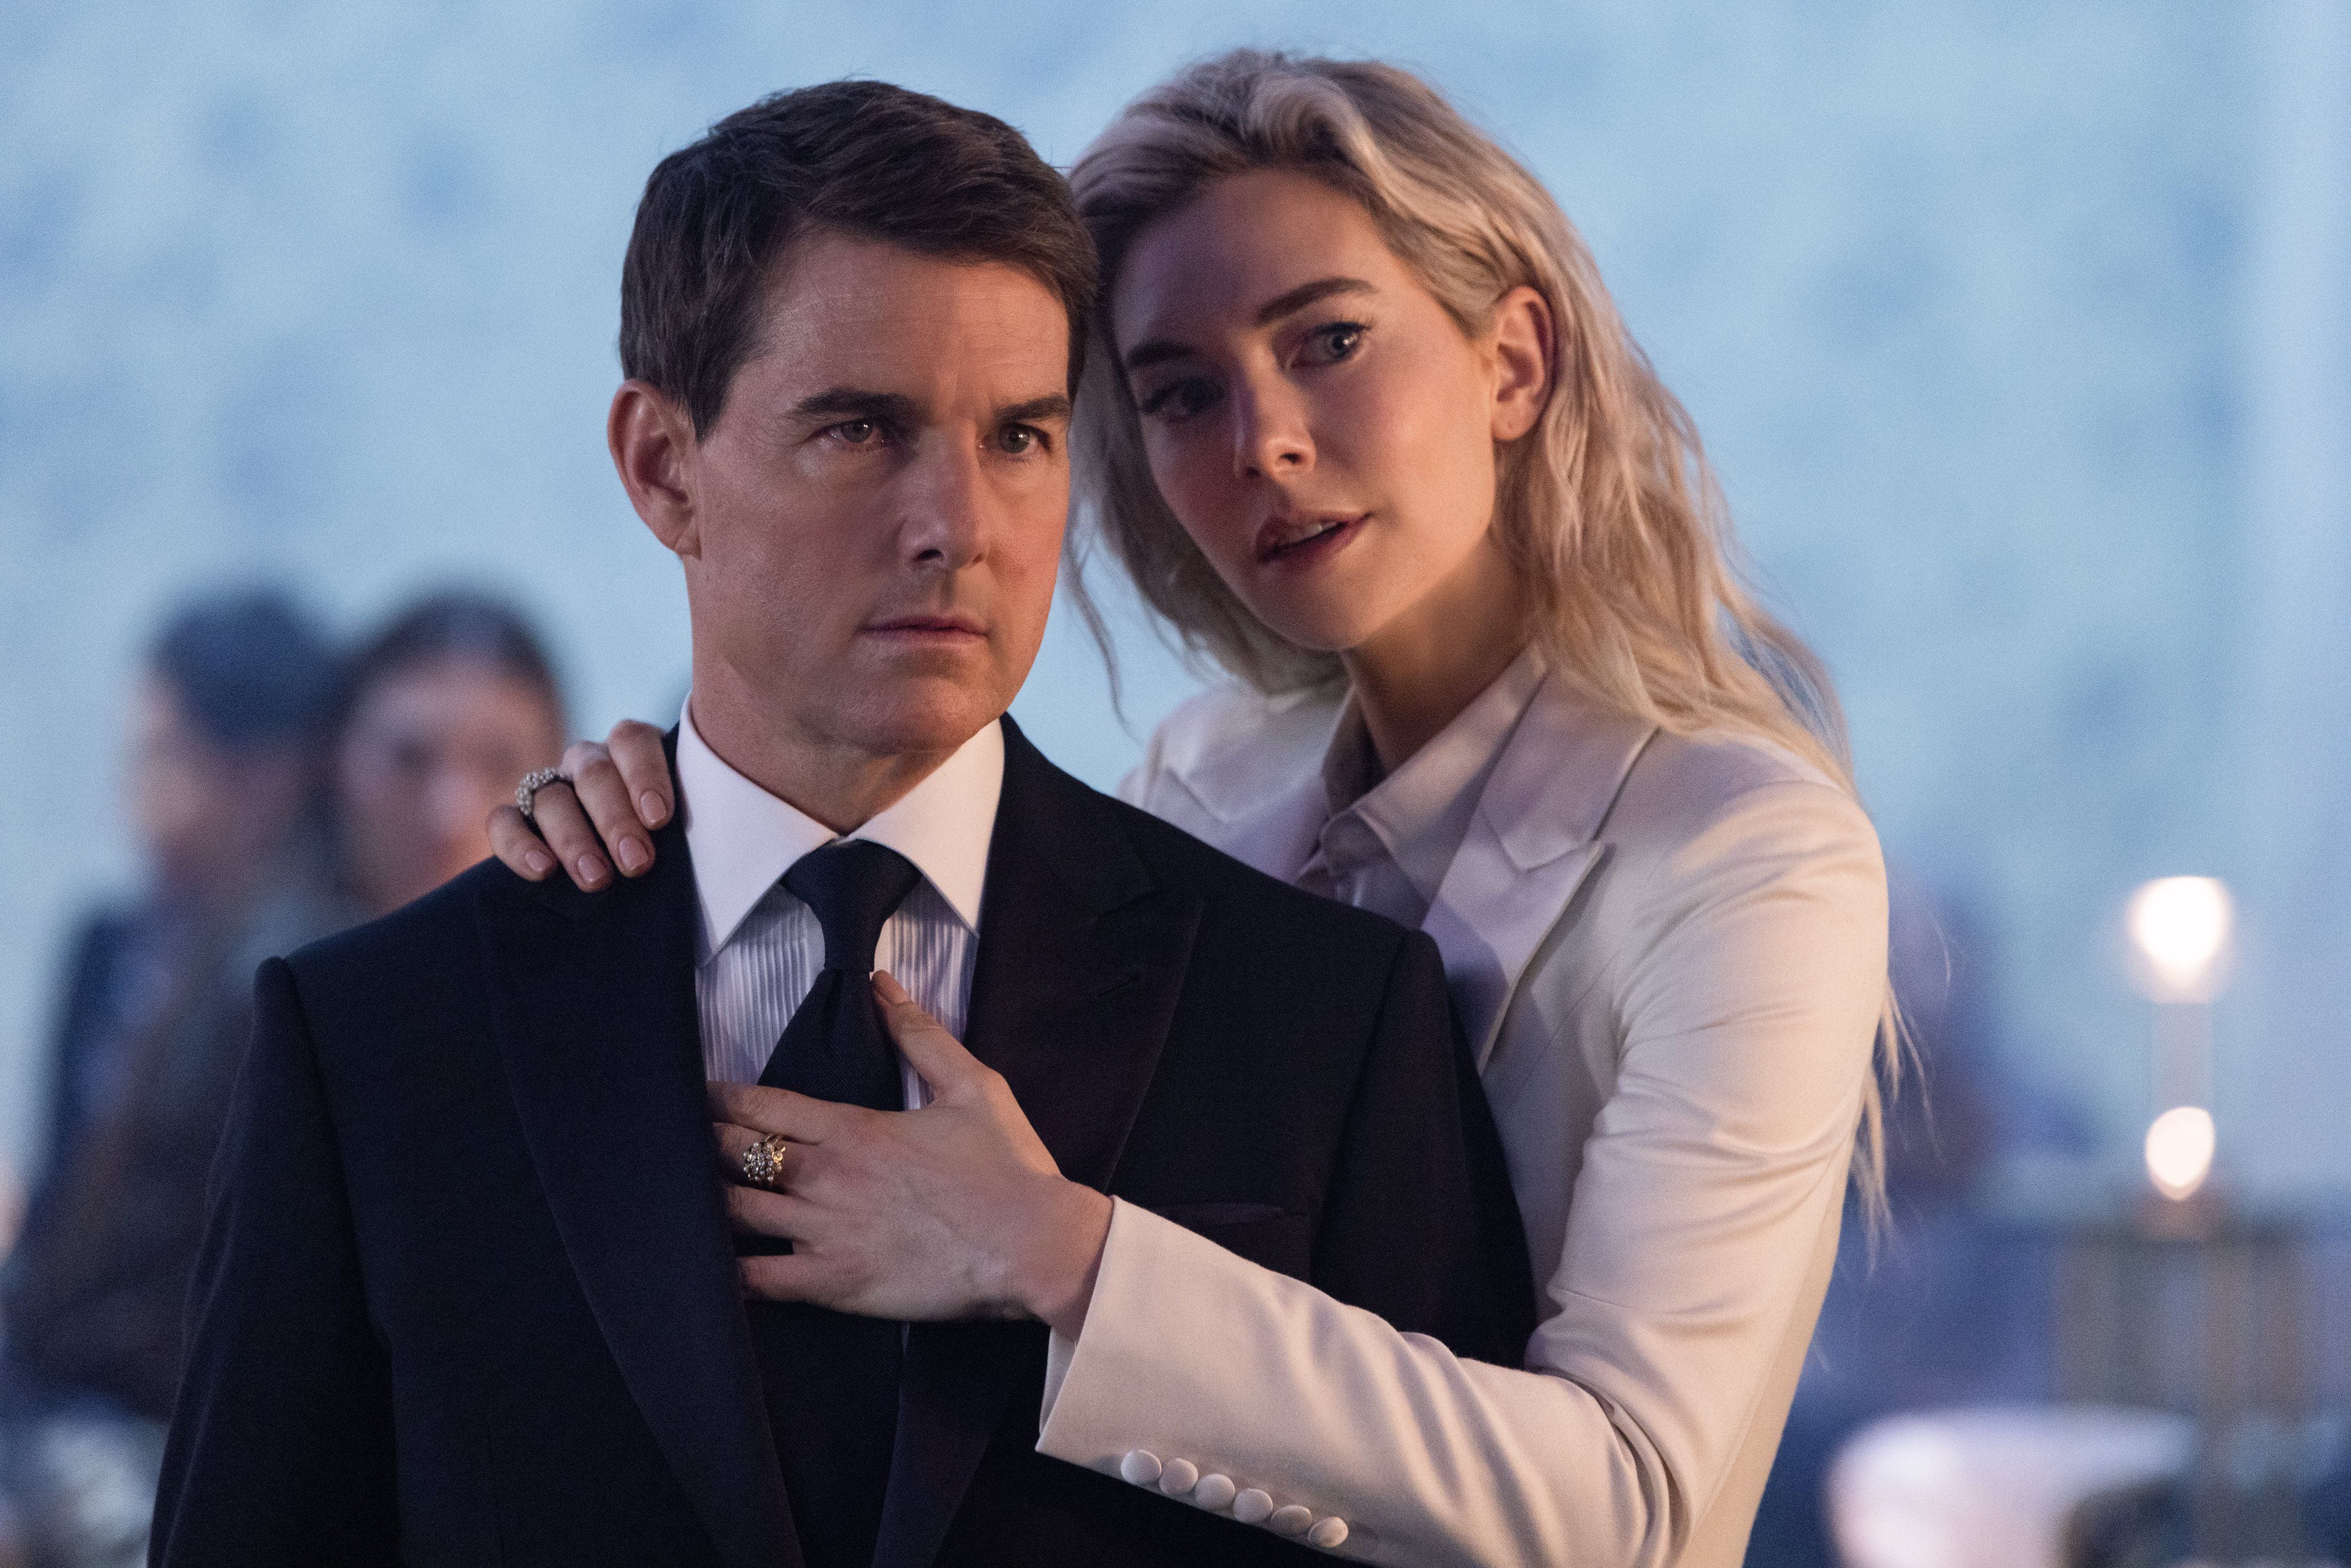 Mission: Impossible streaming: where to watch online?